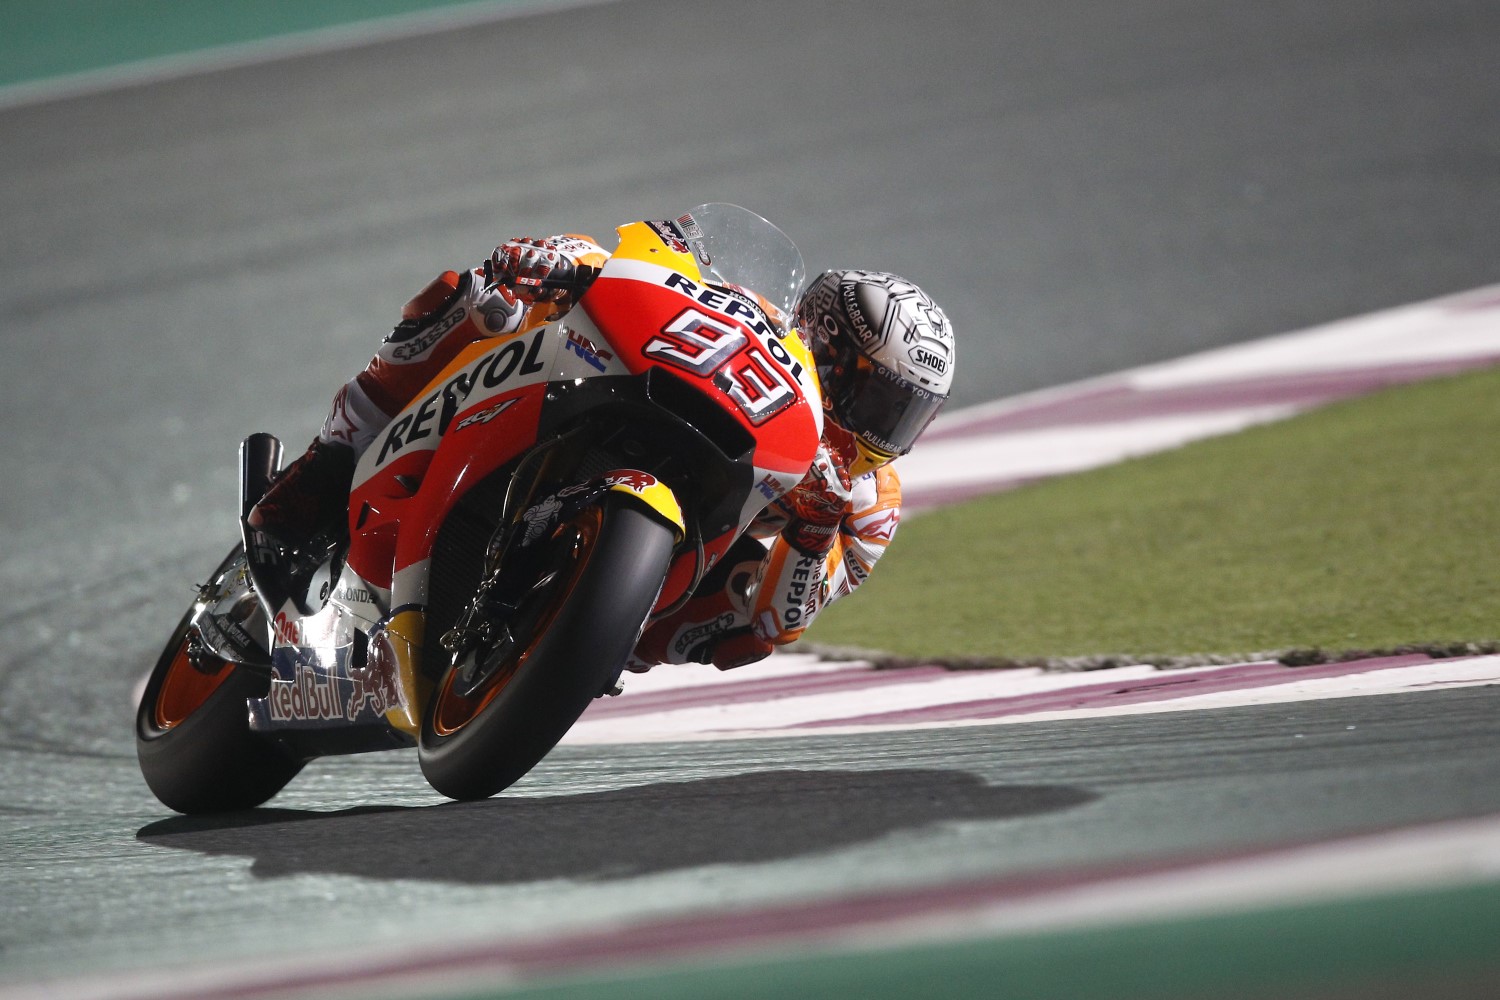 Marquez in Qatar Friday - In MotoGP it's 99% rider and 1% bike. In F1 it's 99% car and 1% driver